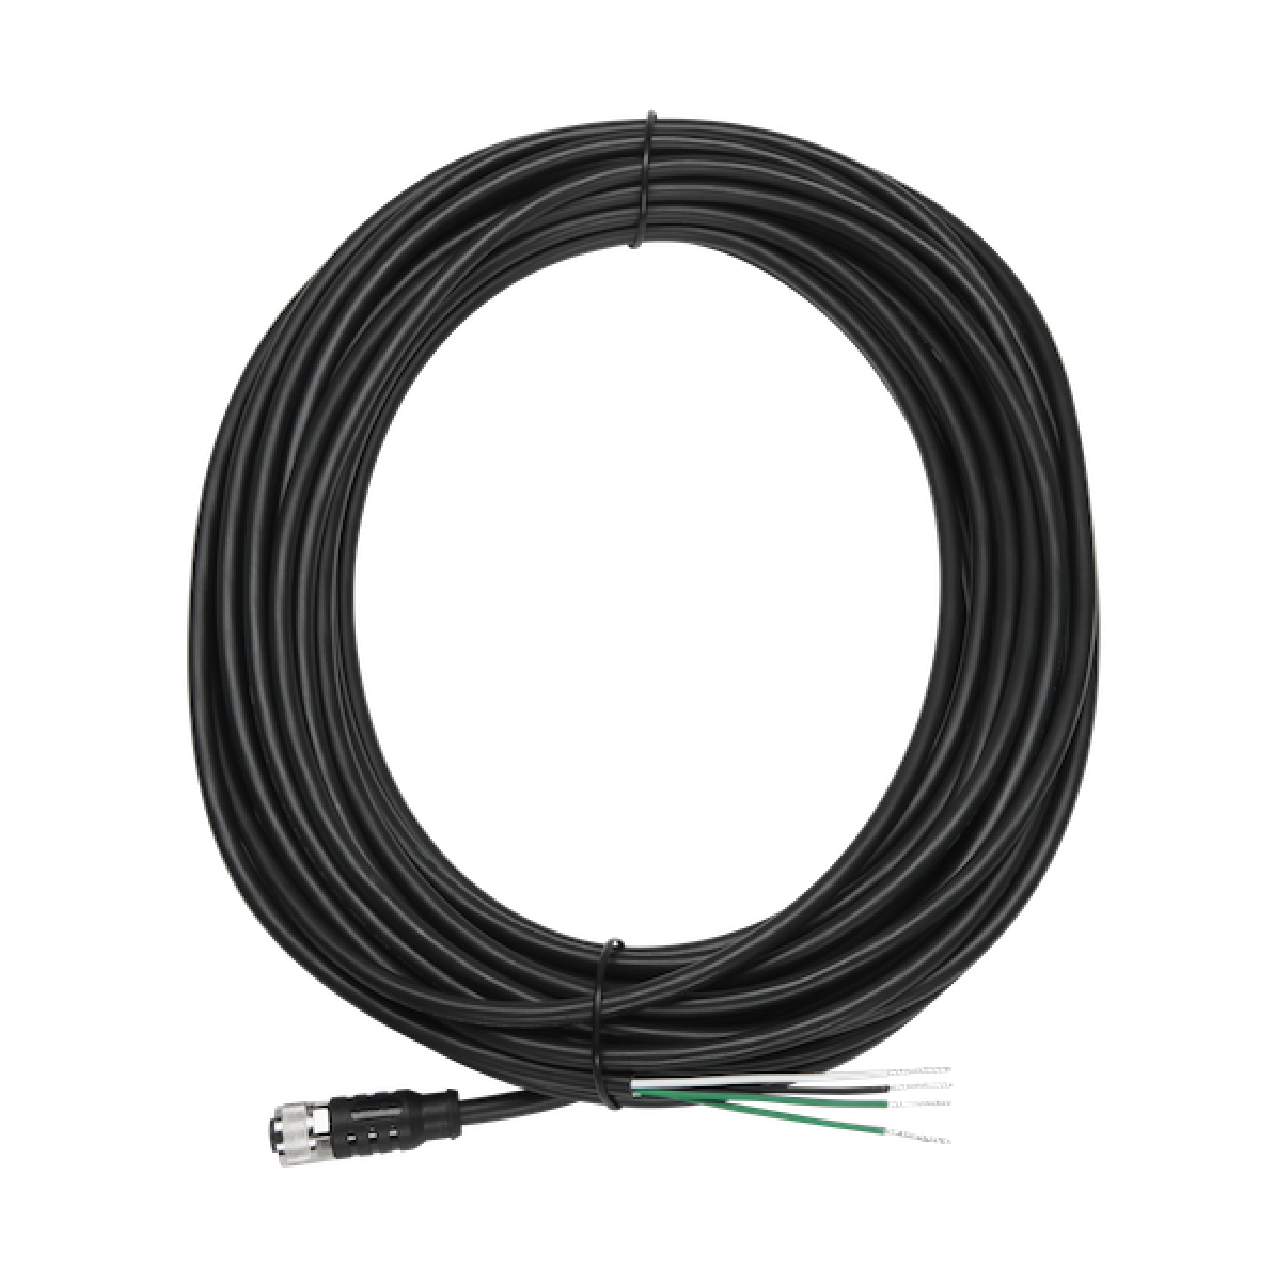 FXR90 M12 to Flying Leads, AC Input Line Cord